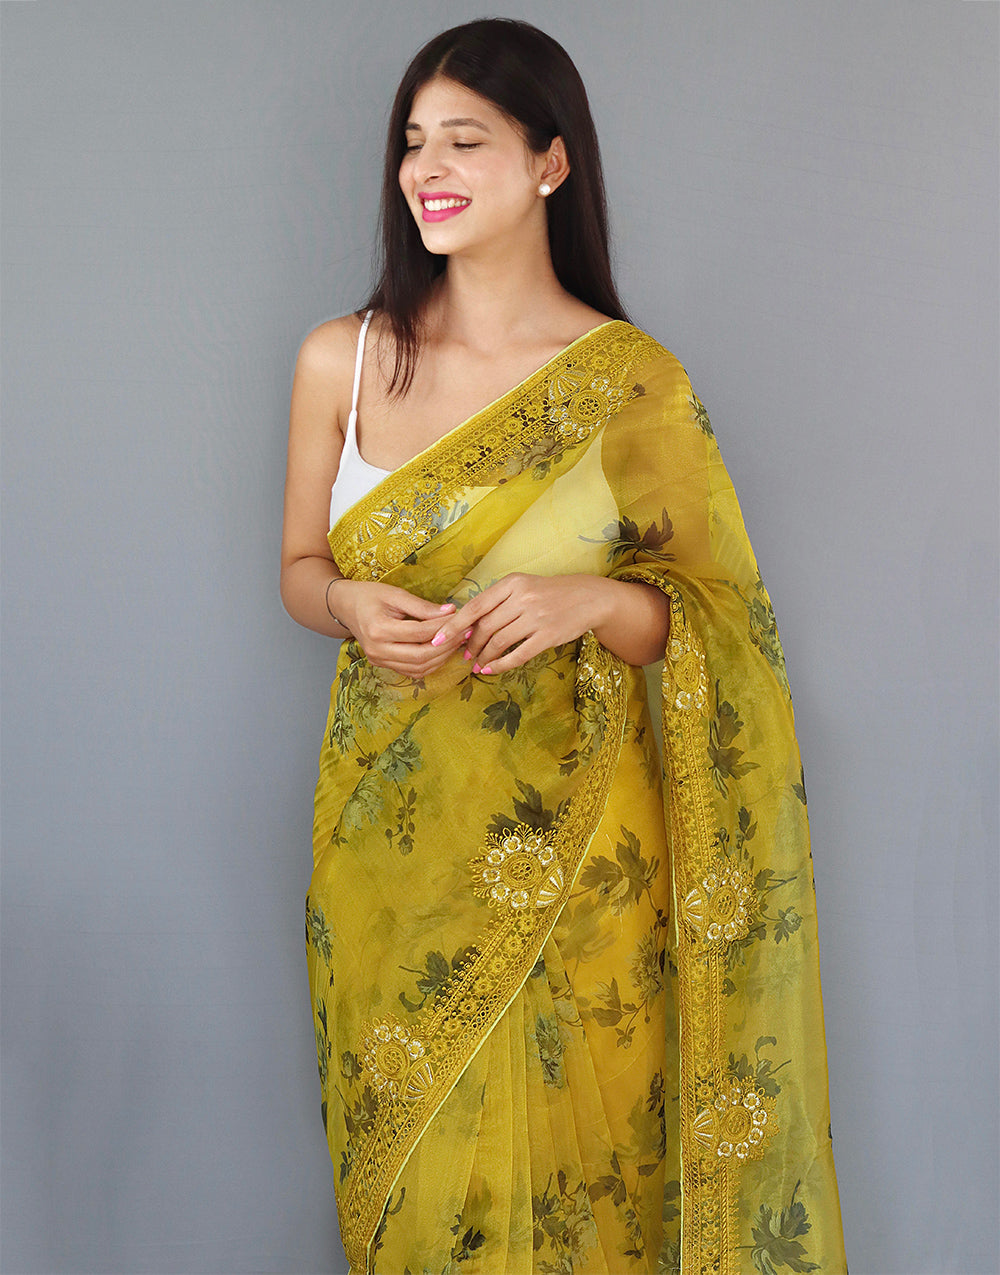 Goldenrod Yellow Organza Saree With Printed & Embroidery Work Border